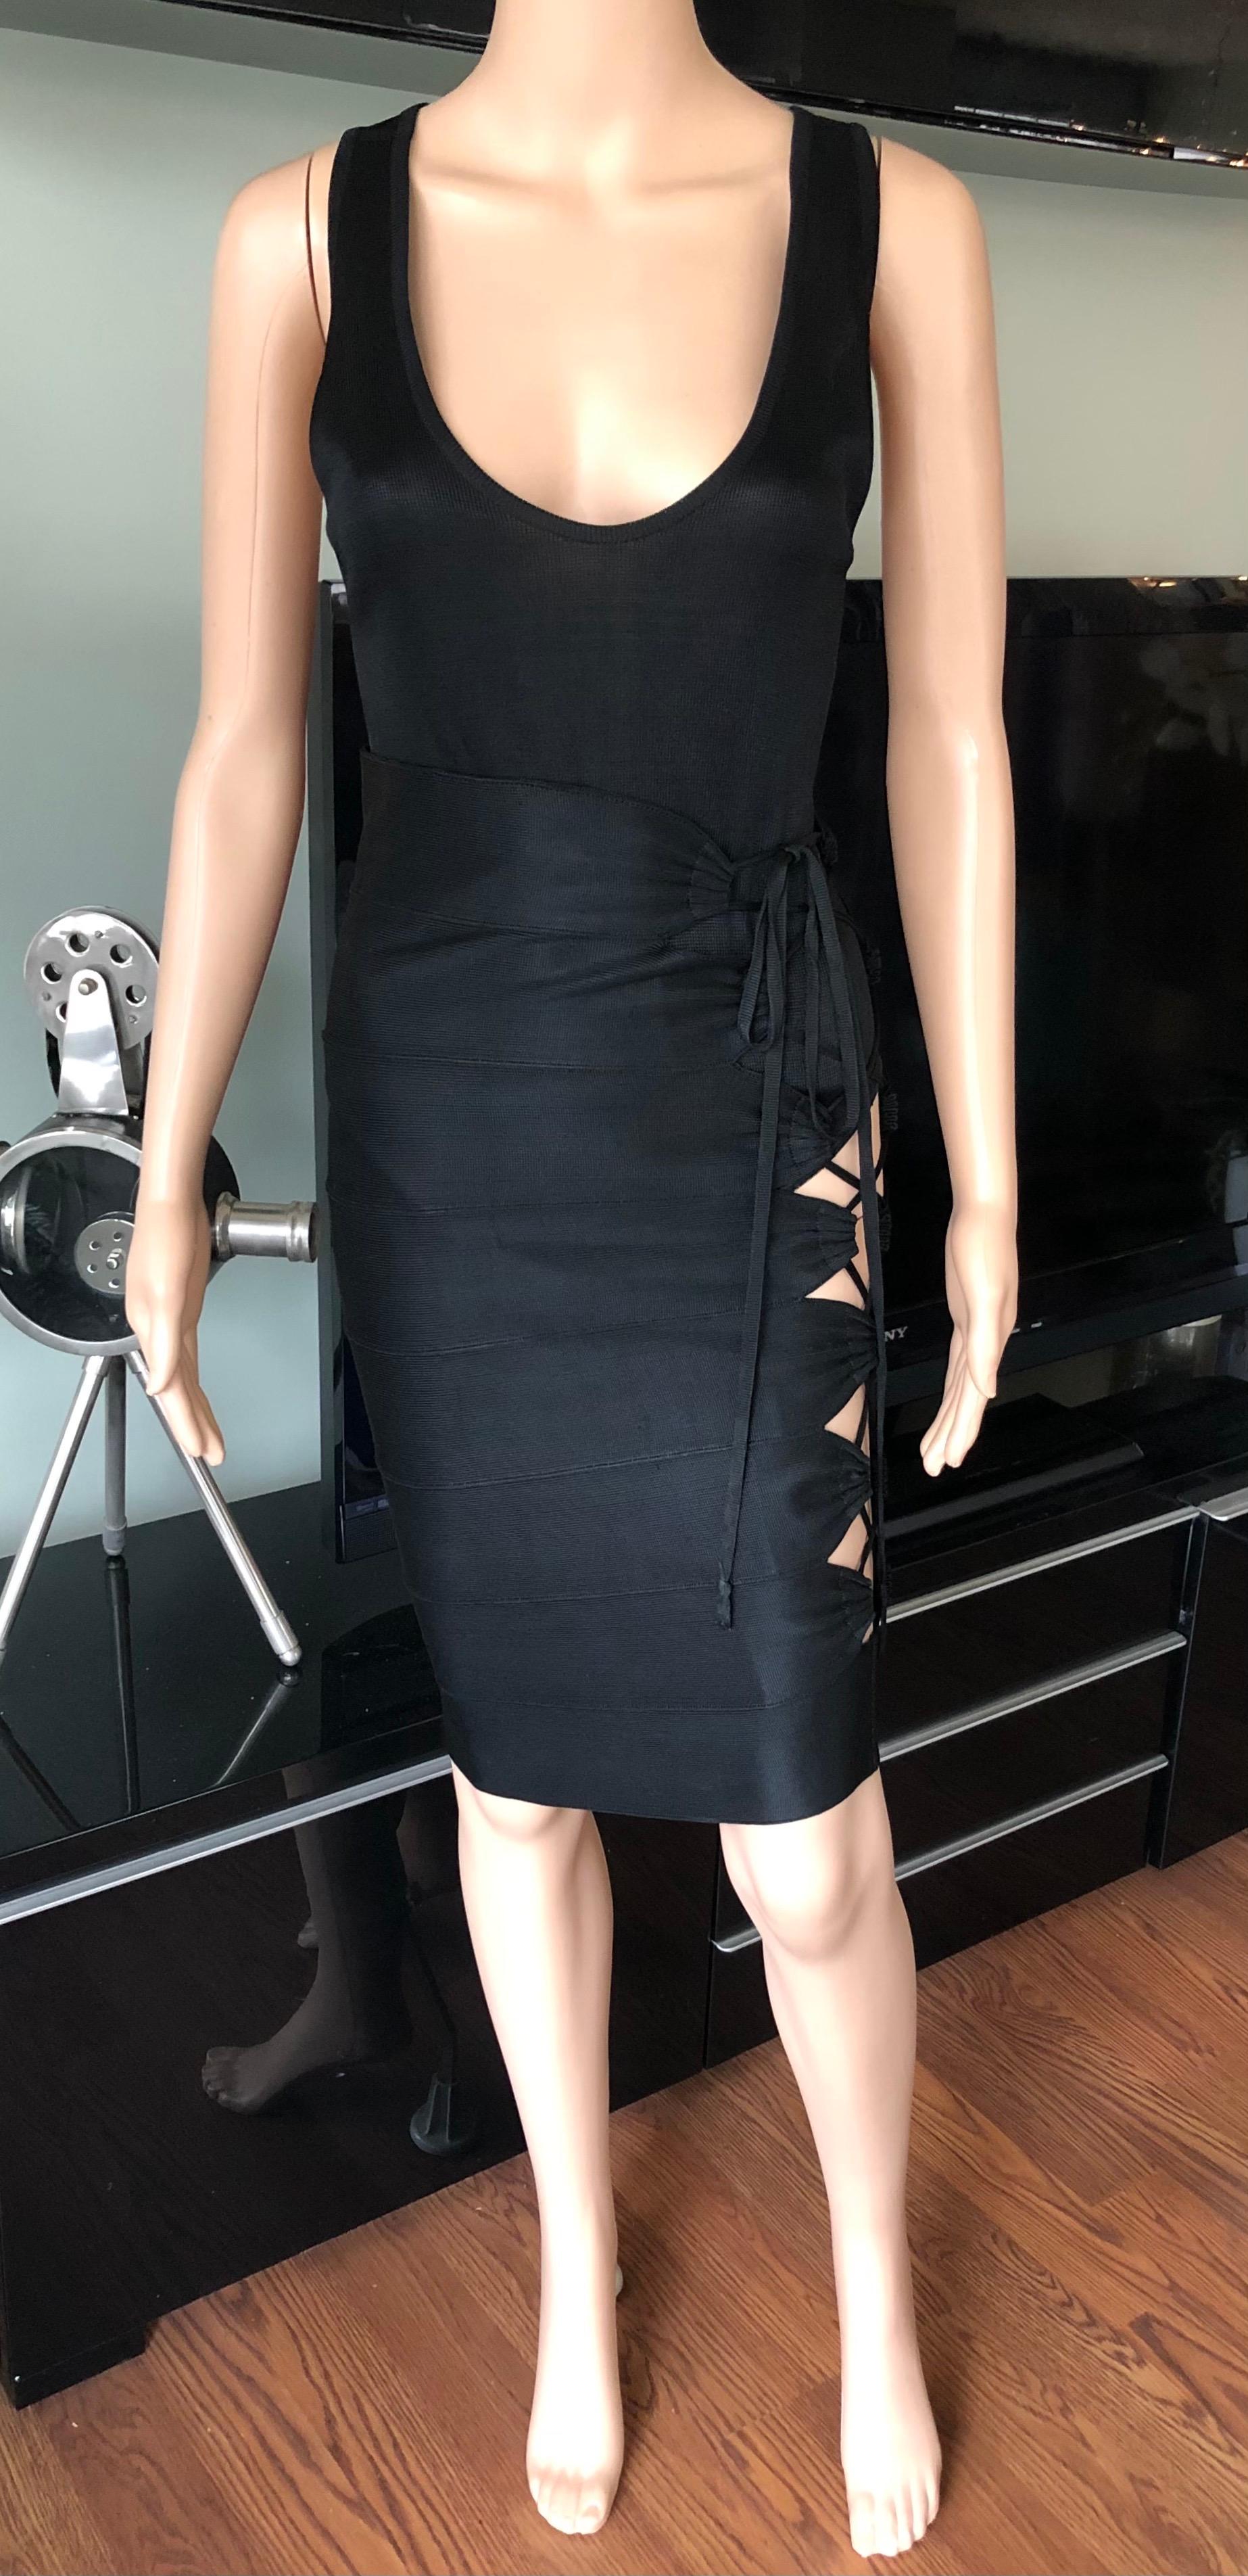 Azzedine Alaia S/S 1986 Vintage Cutout Lace Up Skirt & Bodysuit Top 2 Piece Set In Good Condition For Sale In Naples, FL